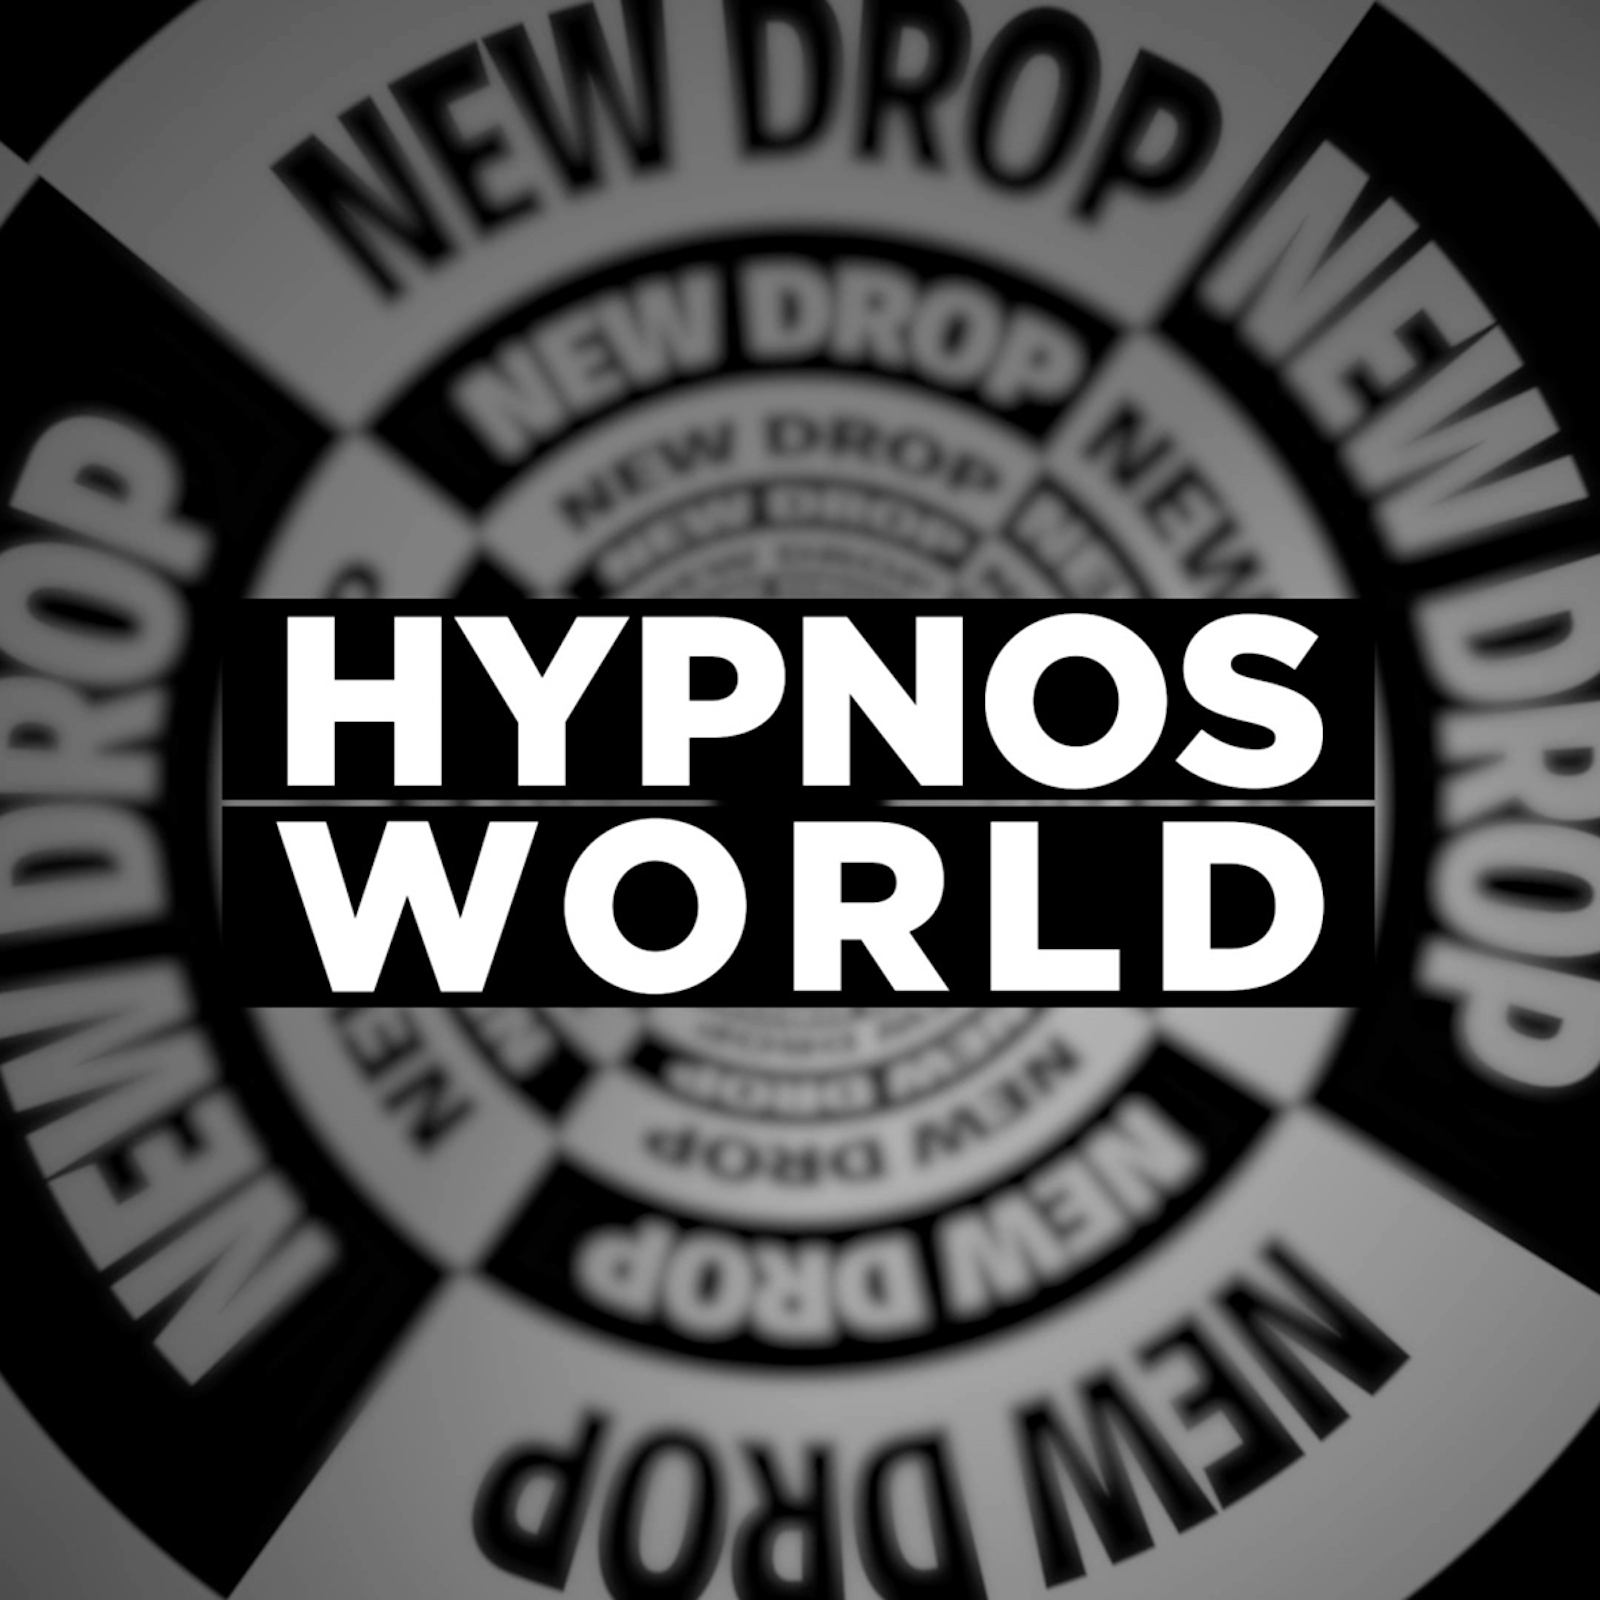 NEW HYPNOS DROP curated by Satyrus Meta Art